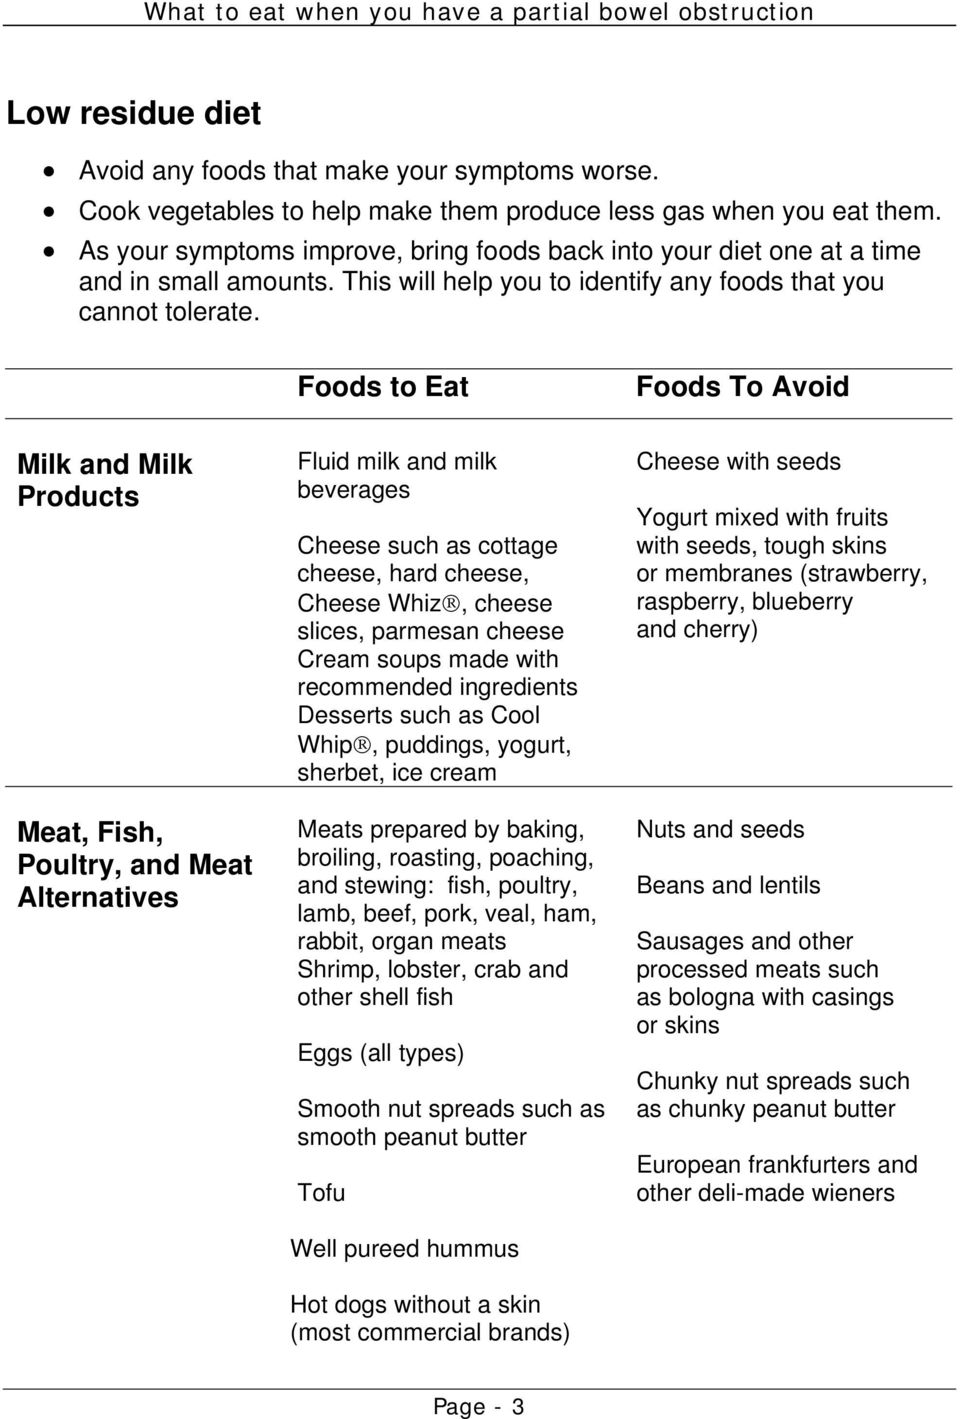 Foods to Eat Milk and Milk Products Meat, Fish, Poultry, and Meat Alternatives Fluid milk and milk beverages Cheese such as cottage cheese, hard cheese, Cheese Whiz, cheese slices, parmesan cheese